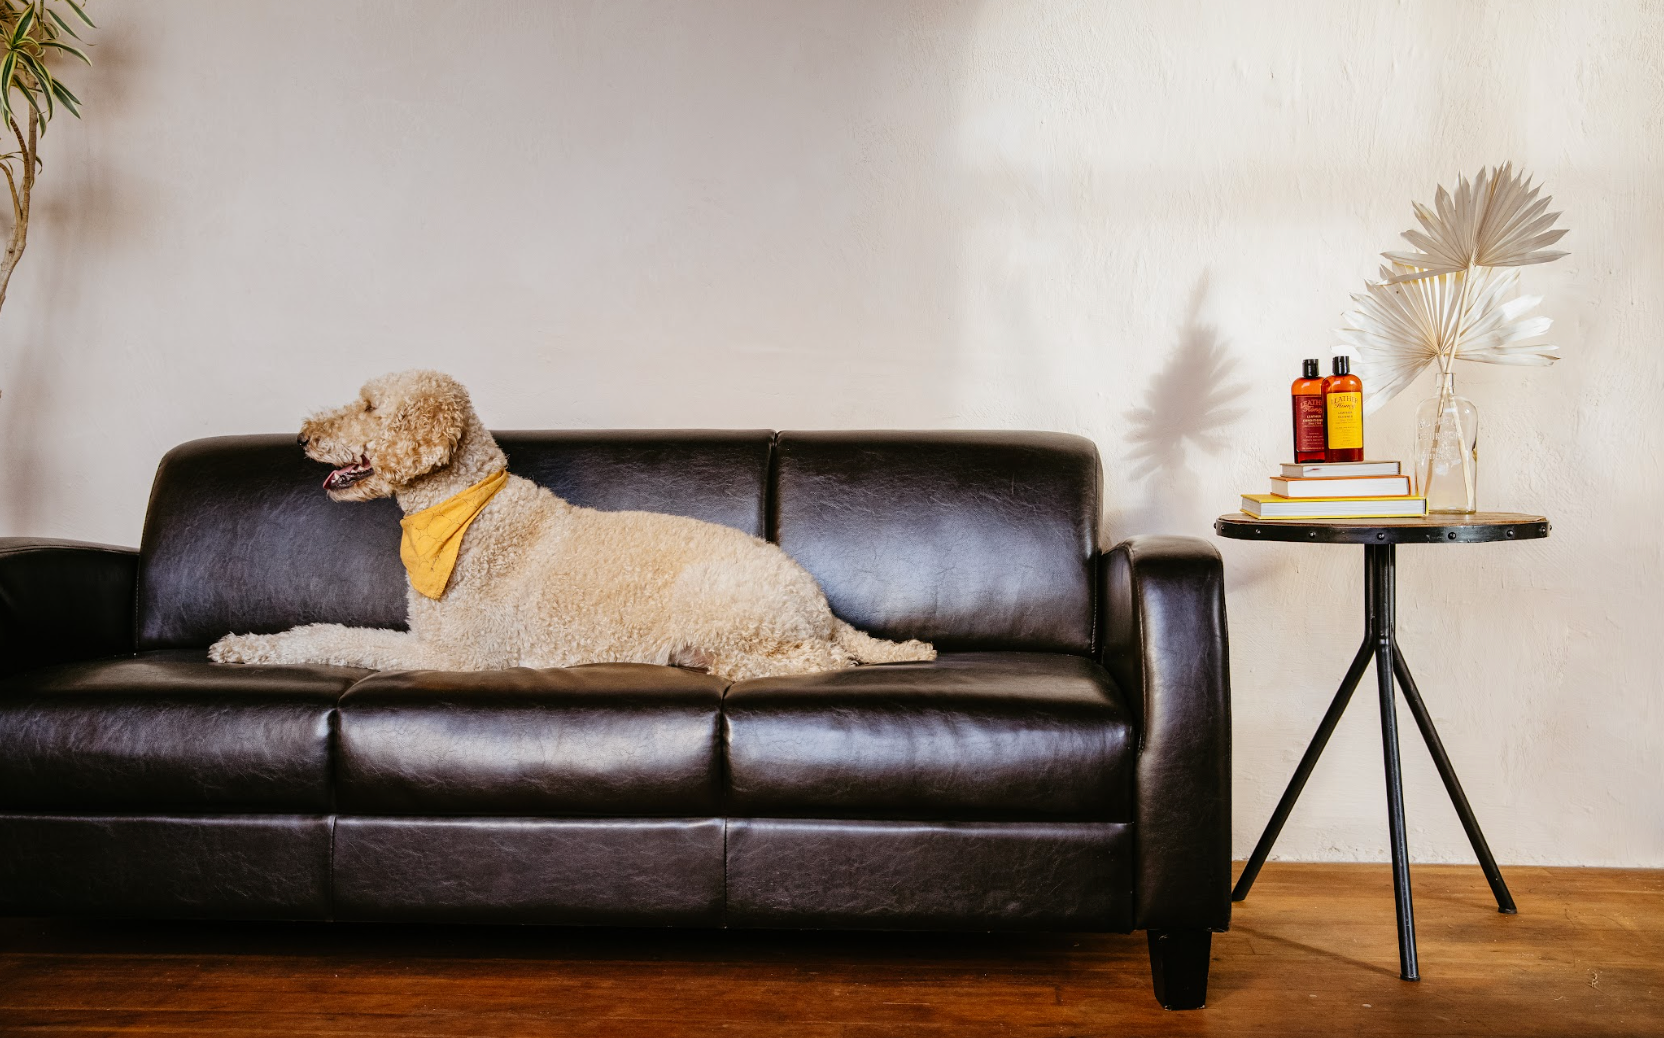 How to Clean a Leather Couch, Sofa or Chair